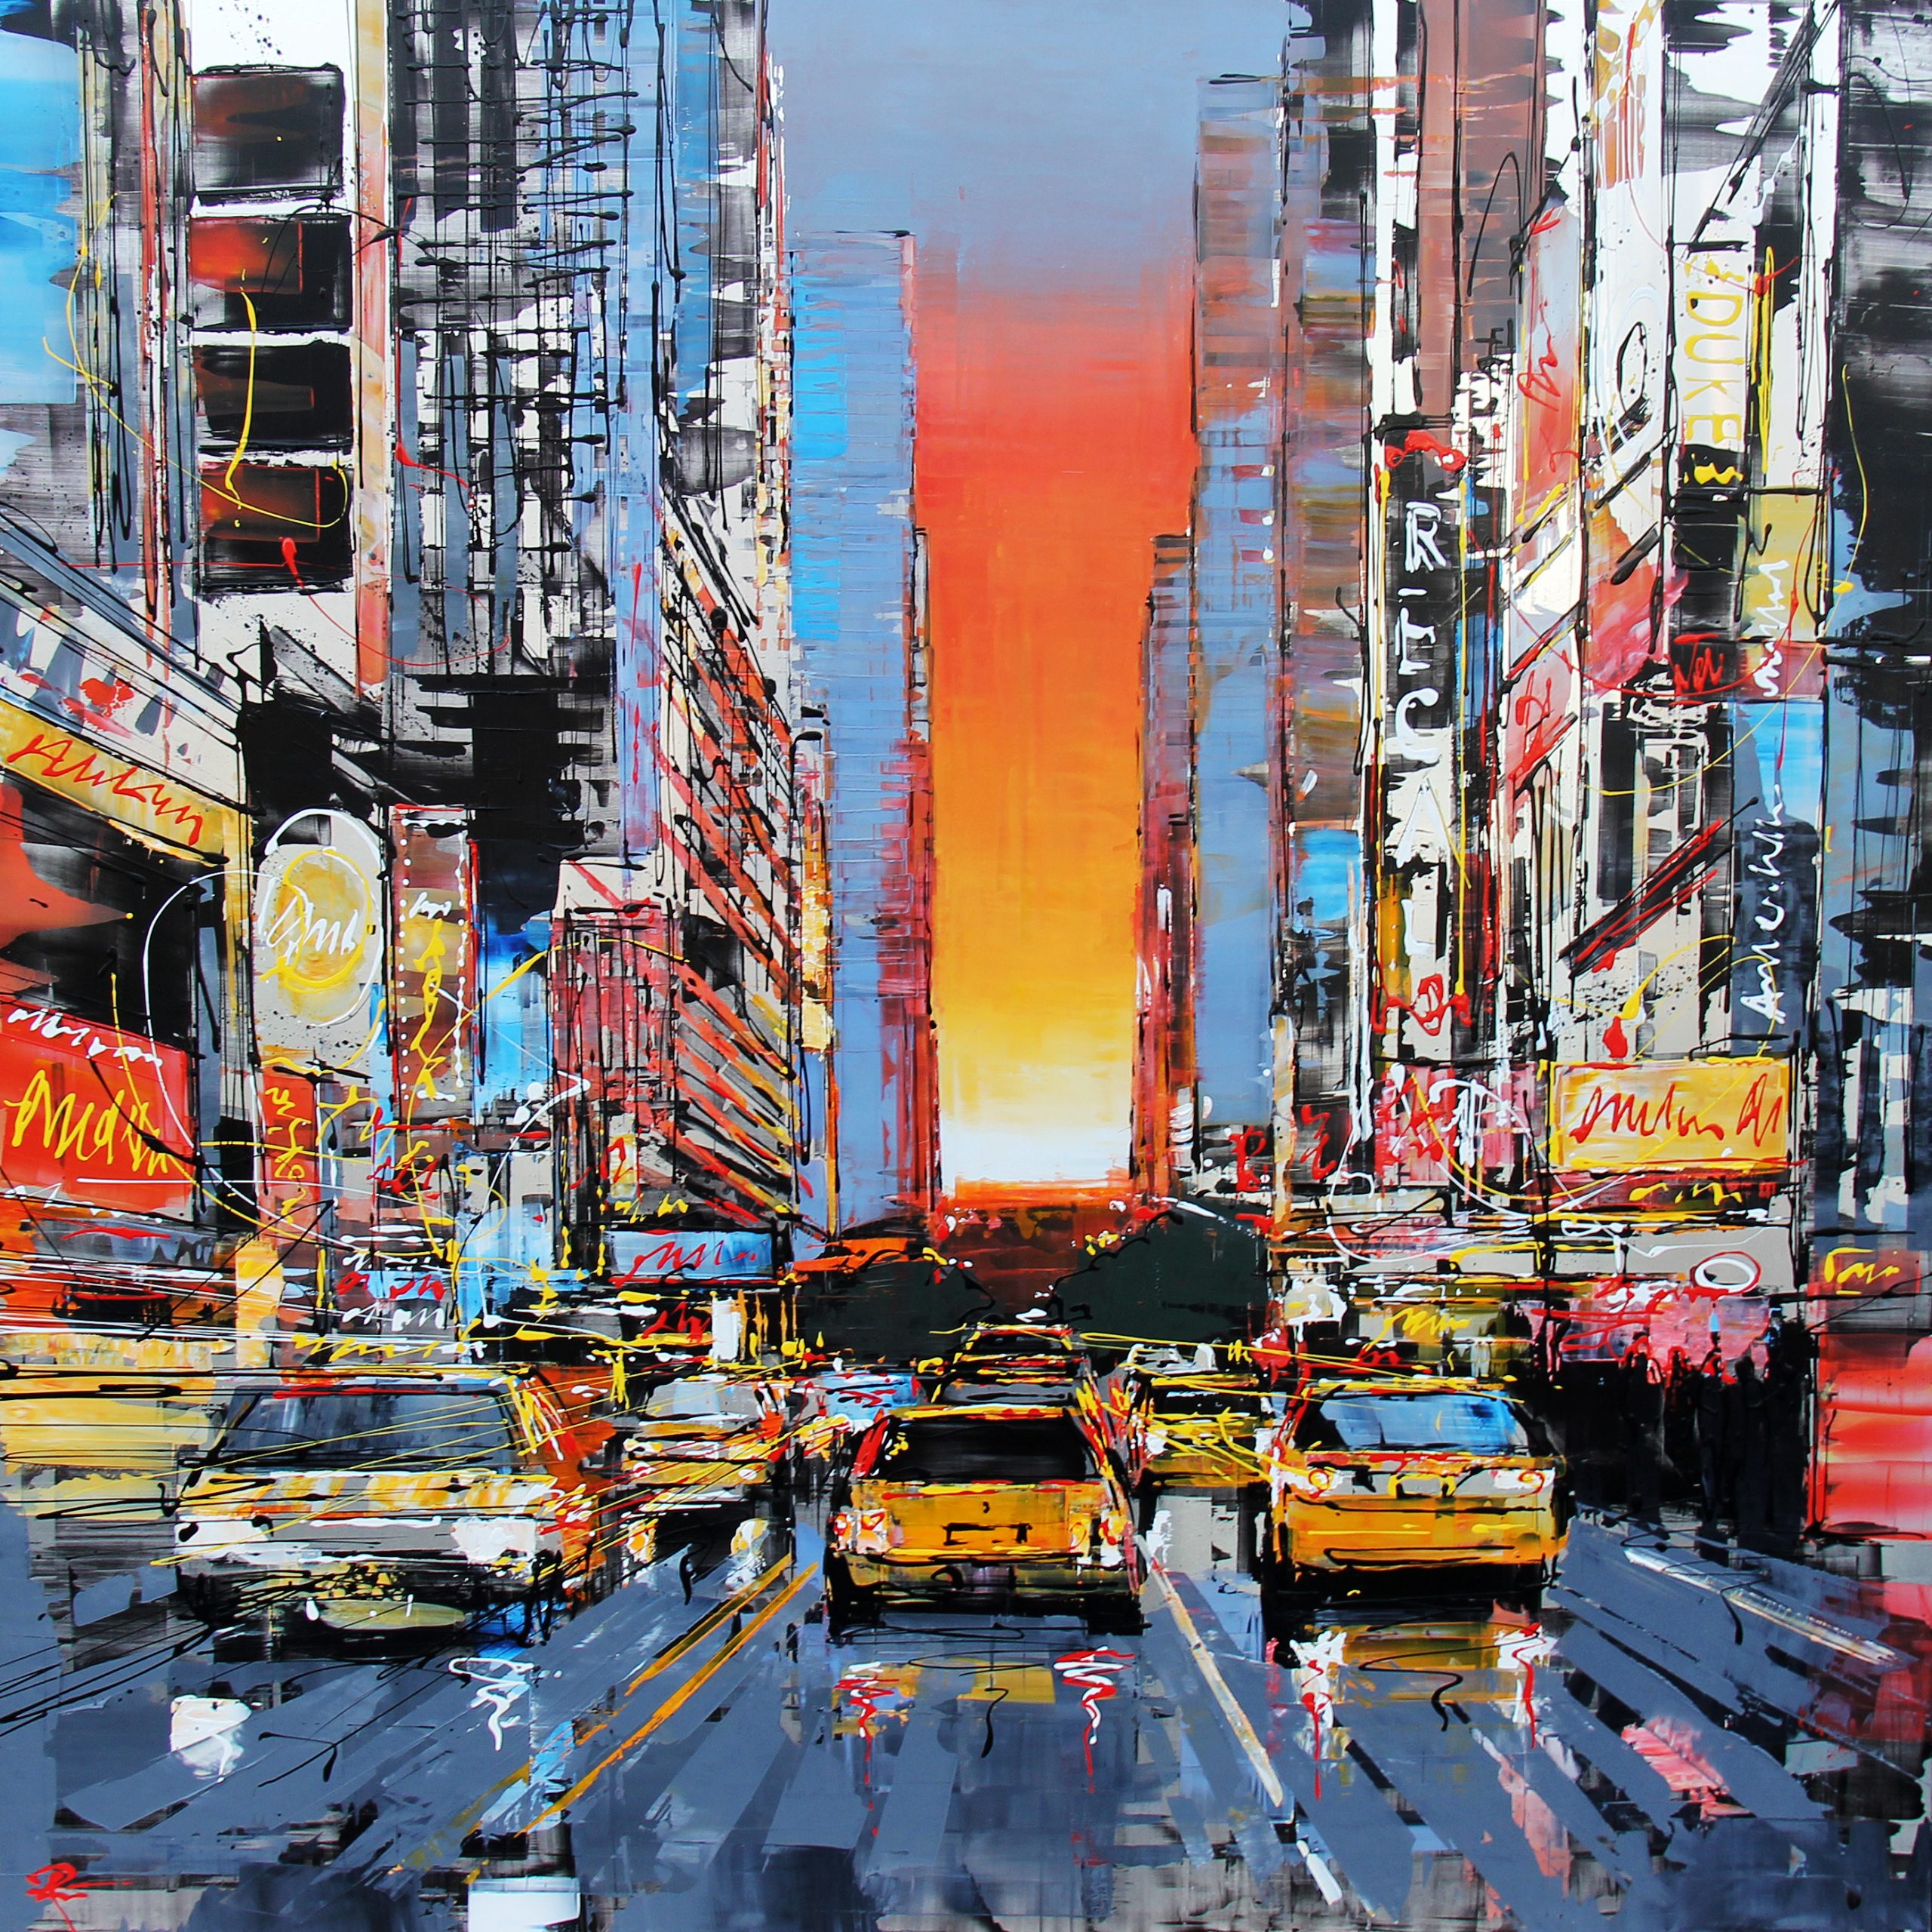 Dynamic Distance by Paul Kenton, UK contemporary cityscape artist, a limited edition print of Times Square from his New York Collectio